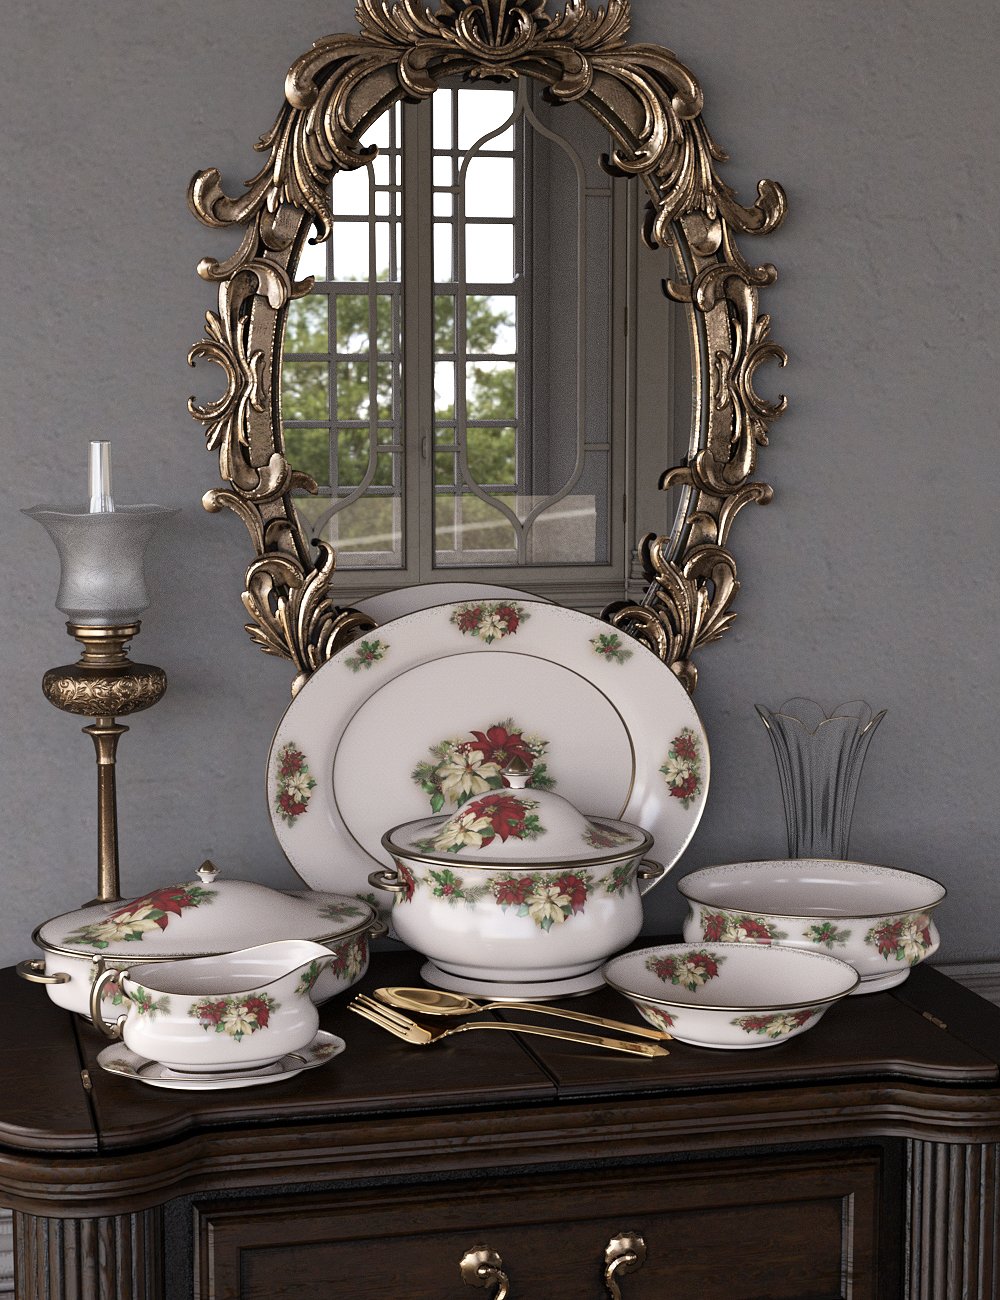 Patterns Vintage China 2 Iray by: LaurieS, 3D Models by Daz 3D